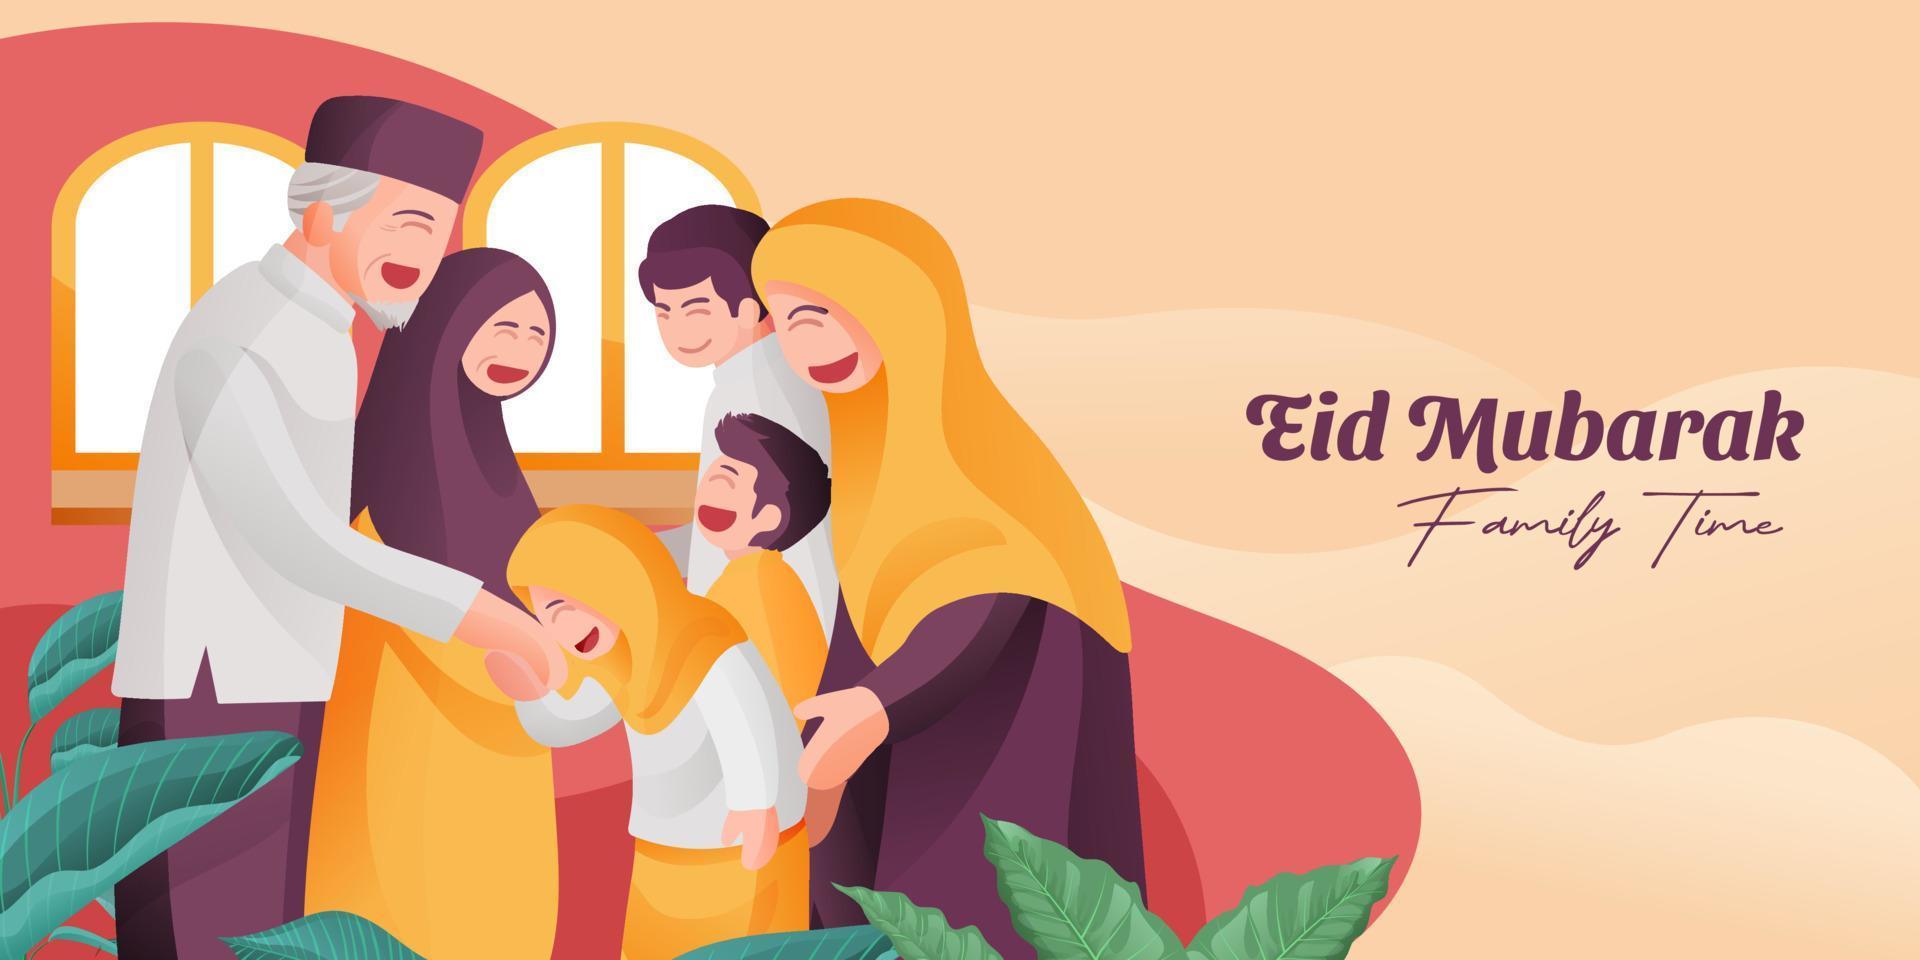 Eid Mubarak Family Gathering Illustration With Muslim Elder Parents and Kids Together Smile Full of Happiness vector